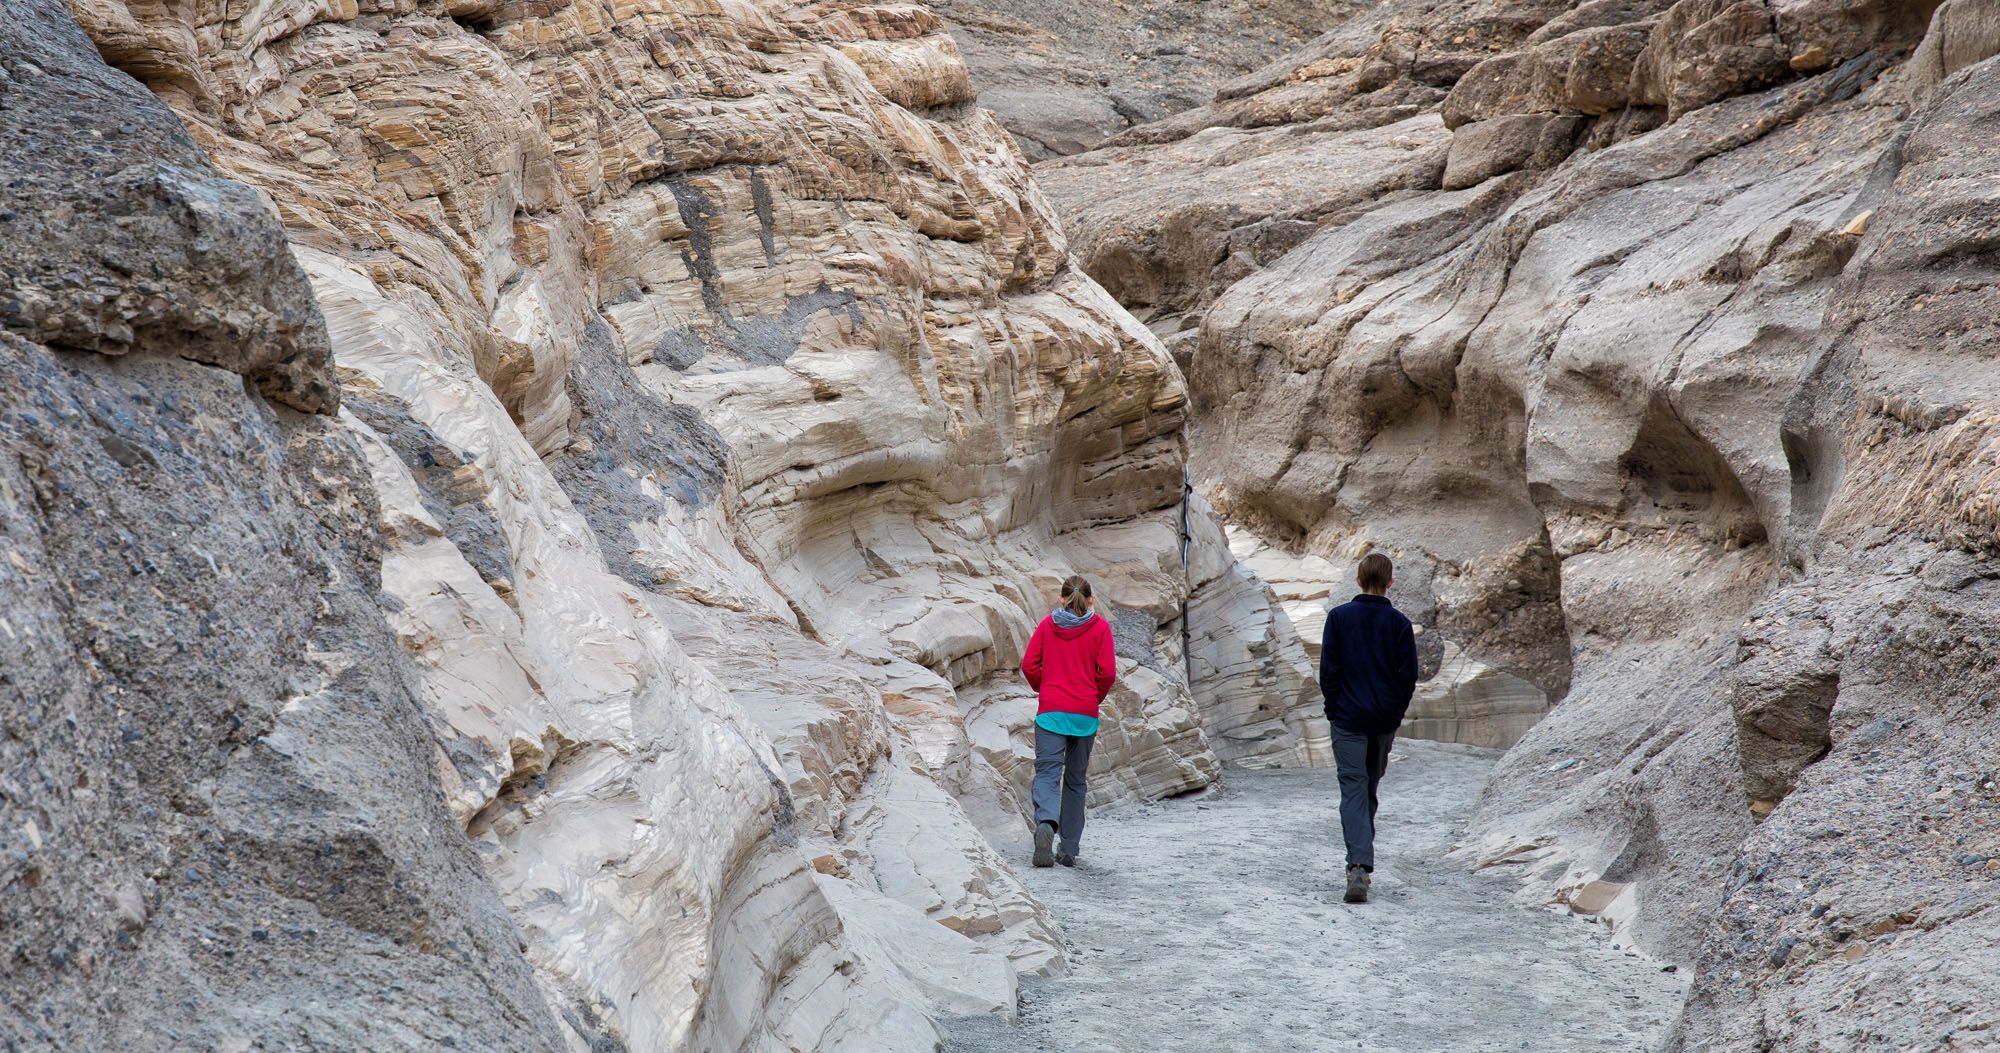 Featured image for “Hiking Mosaic Canyon in Death Valley”